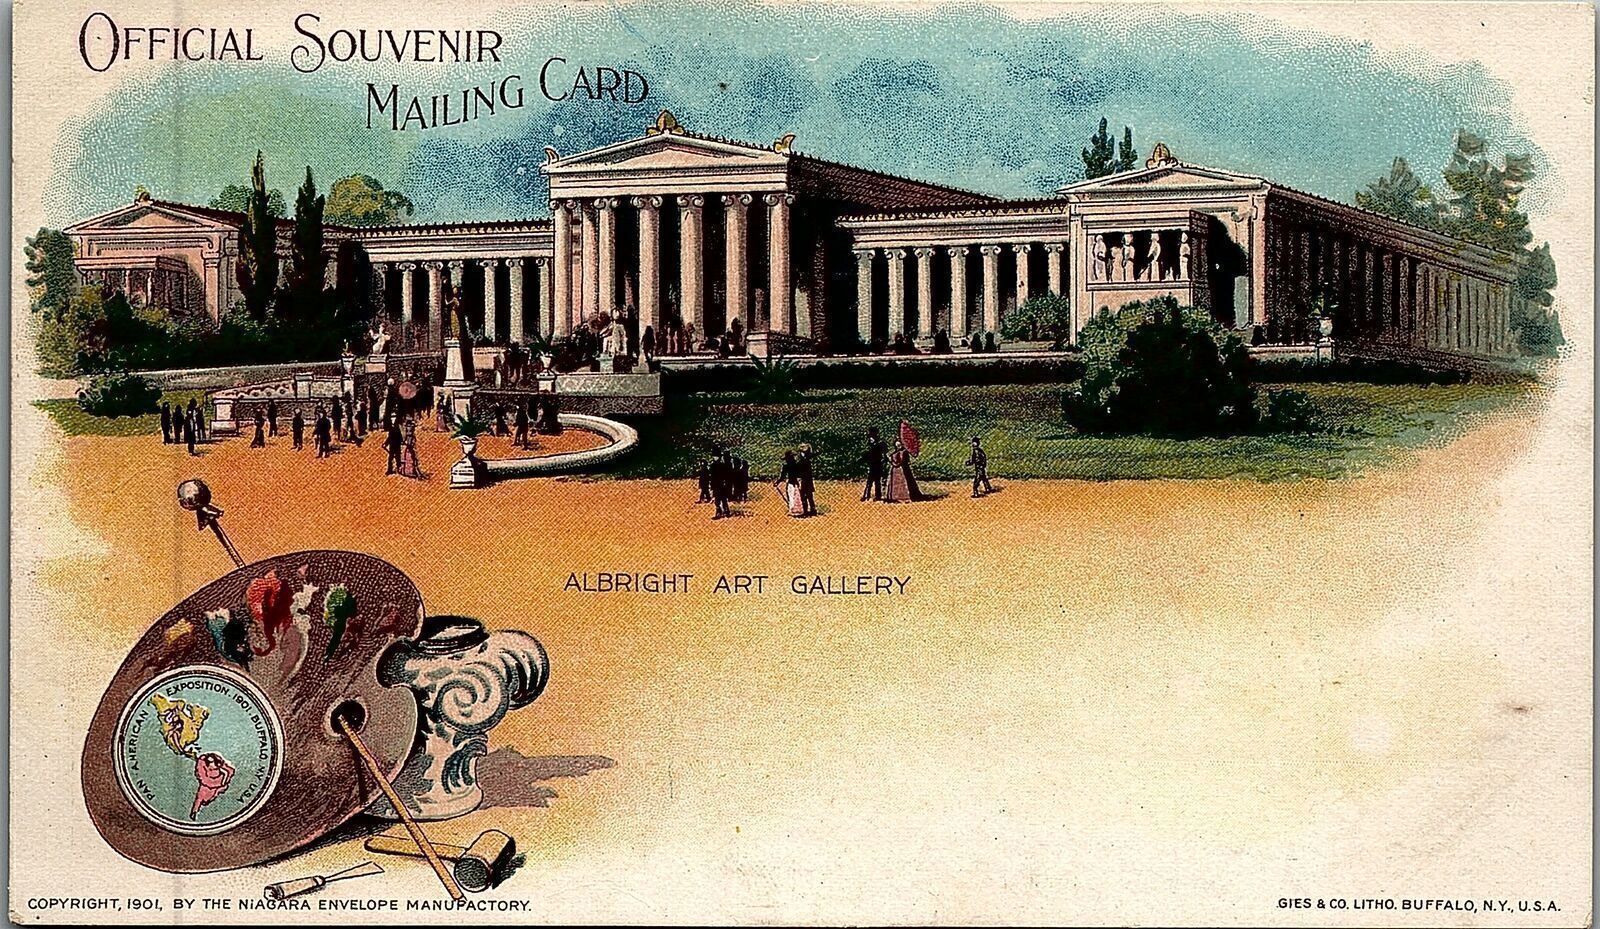 1901 PAN AMERICAN EXPOSITION BUFFALO ALBRIGHT ART GALLERY MAILING CARD 25-122